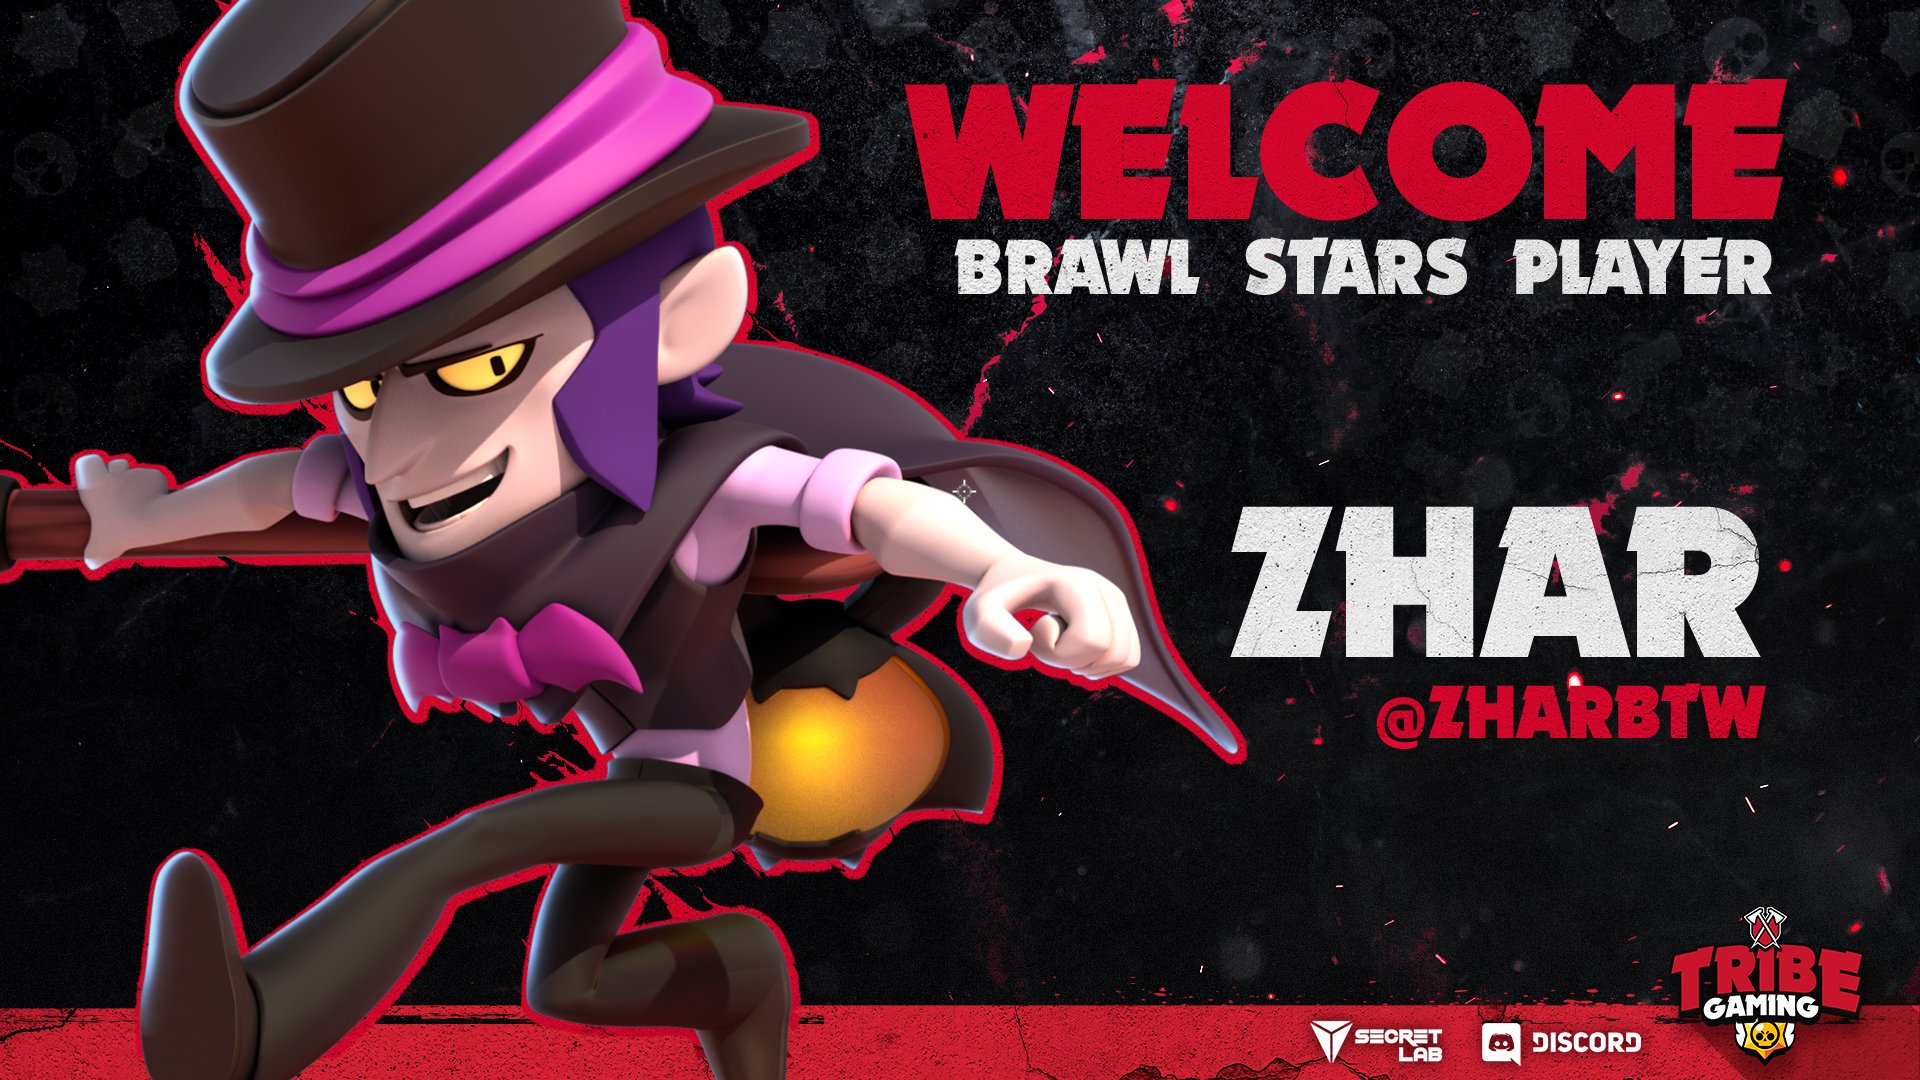 Tribe Gaming On Twitter Welcome To Tribebs S Newest Member Zharbtw He Plays In The Brawl Stars Na Open Qualifiers Today With Teammates Keethbs And Alec26bs Let S Get It Tribewin - zhar brawl stars